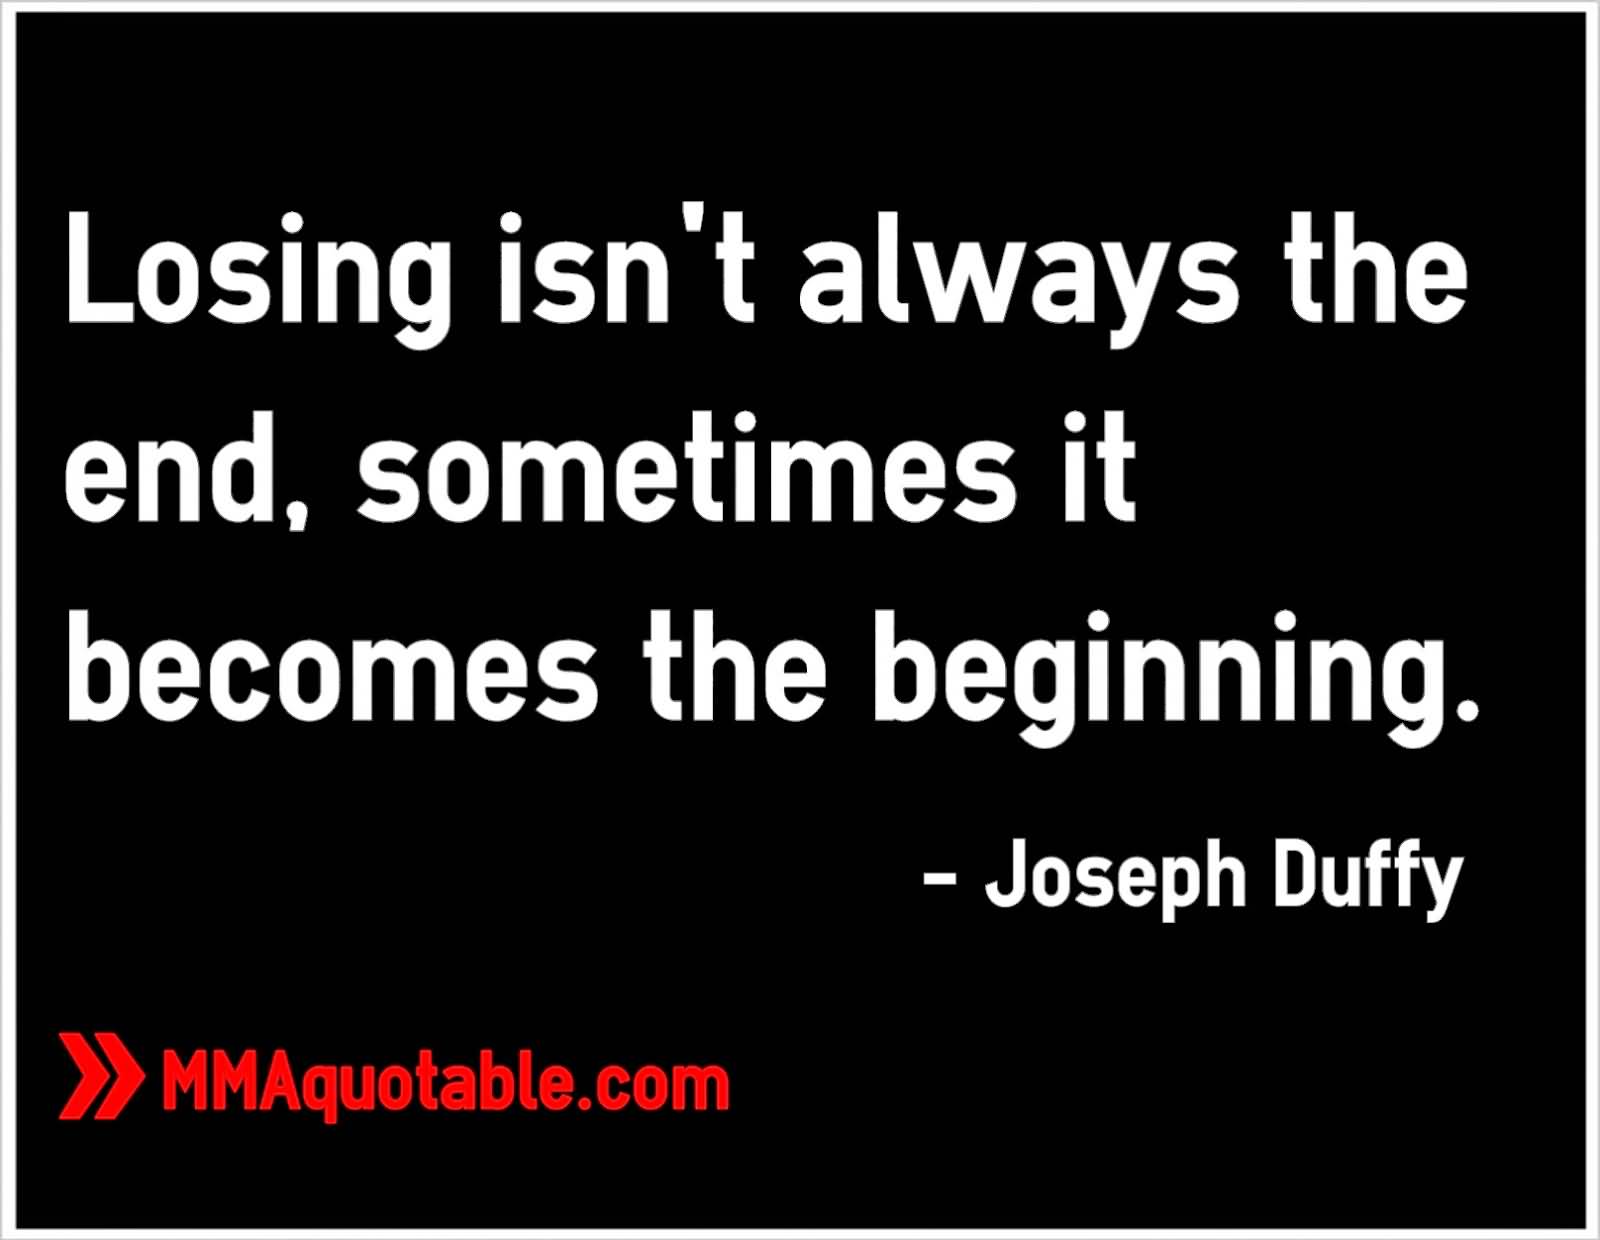 Losing isn't always the end, sometimes it becomes the beginning. Joseph Duffy